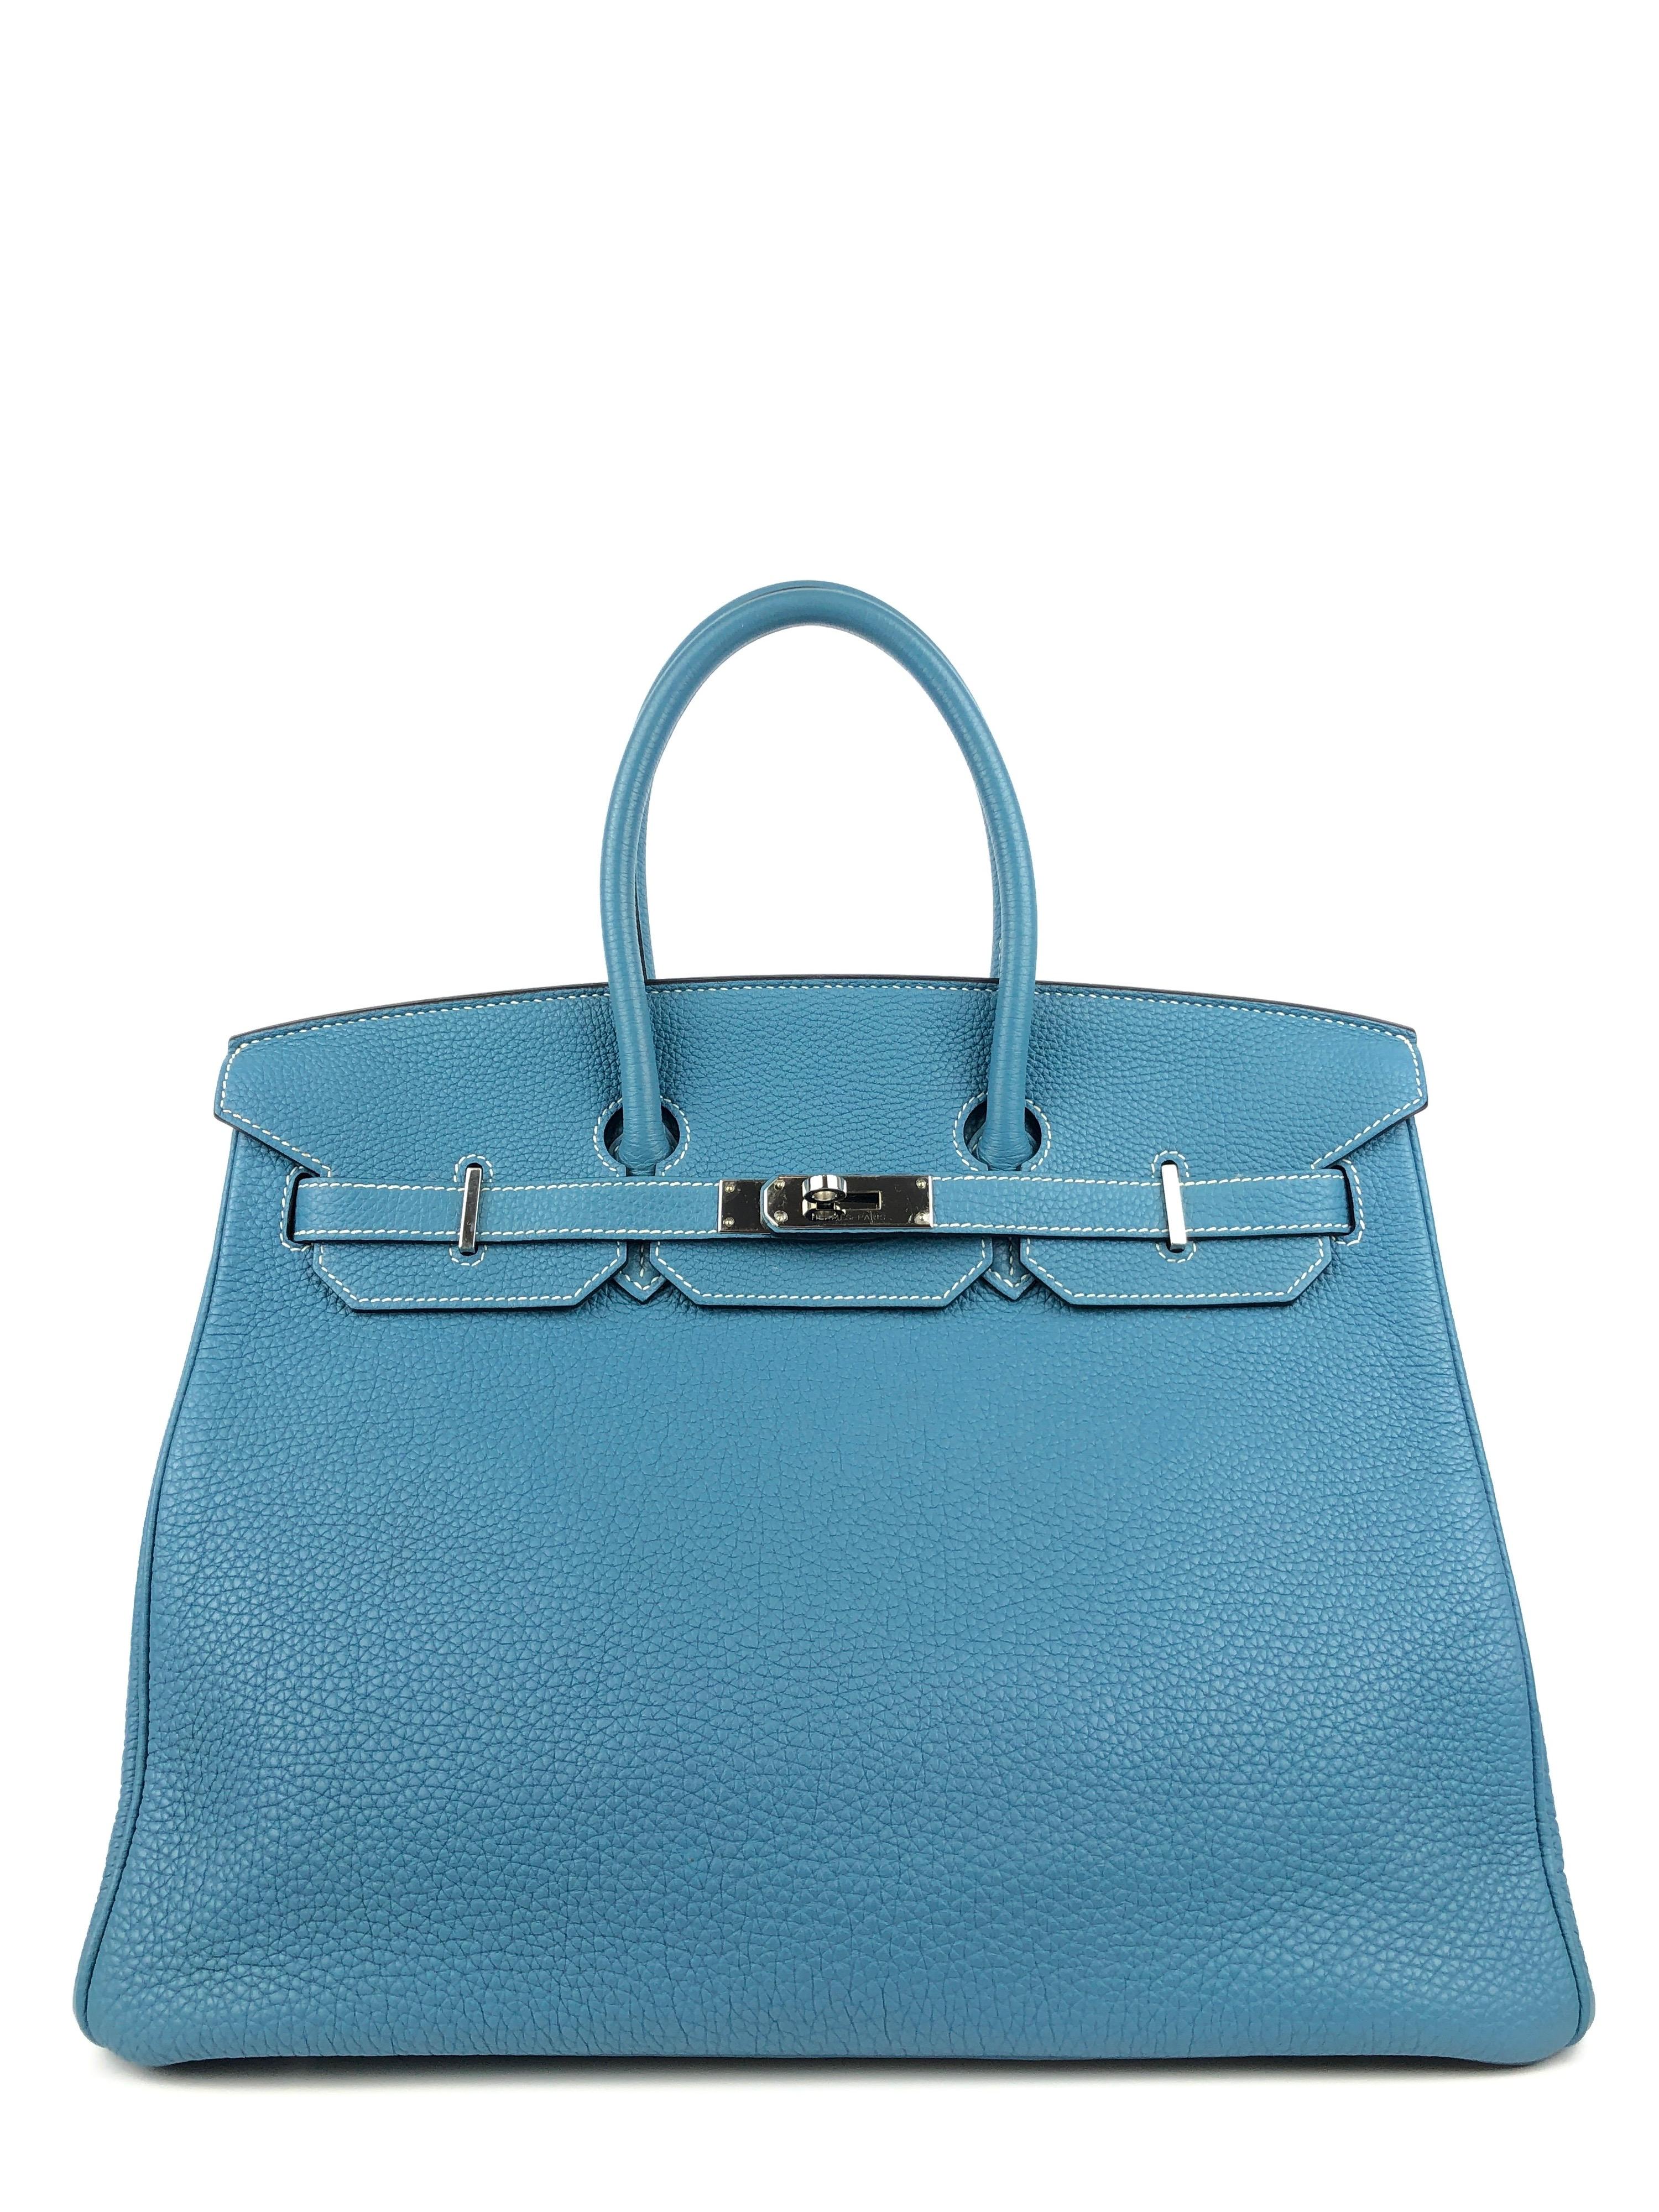 Hermes Birkin 35 Togo Blue Jean Palladium Hardware. Excellent condition, Light hairlines on hardware perfect corners and Buttery structure. 

Shop with Confidence from Lux Addicts. Authenticity Guaranteed! 